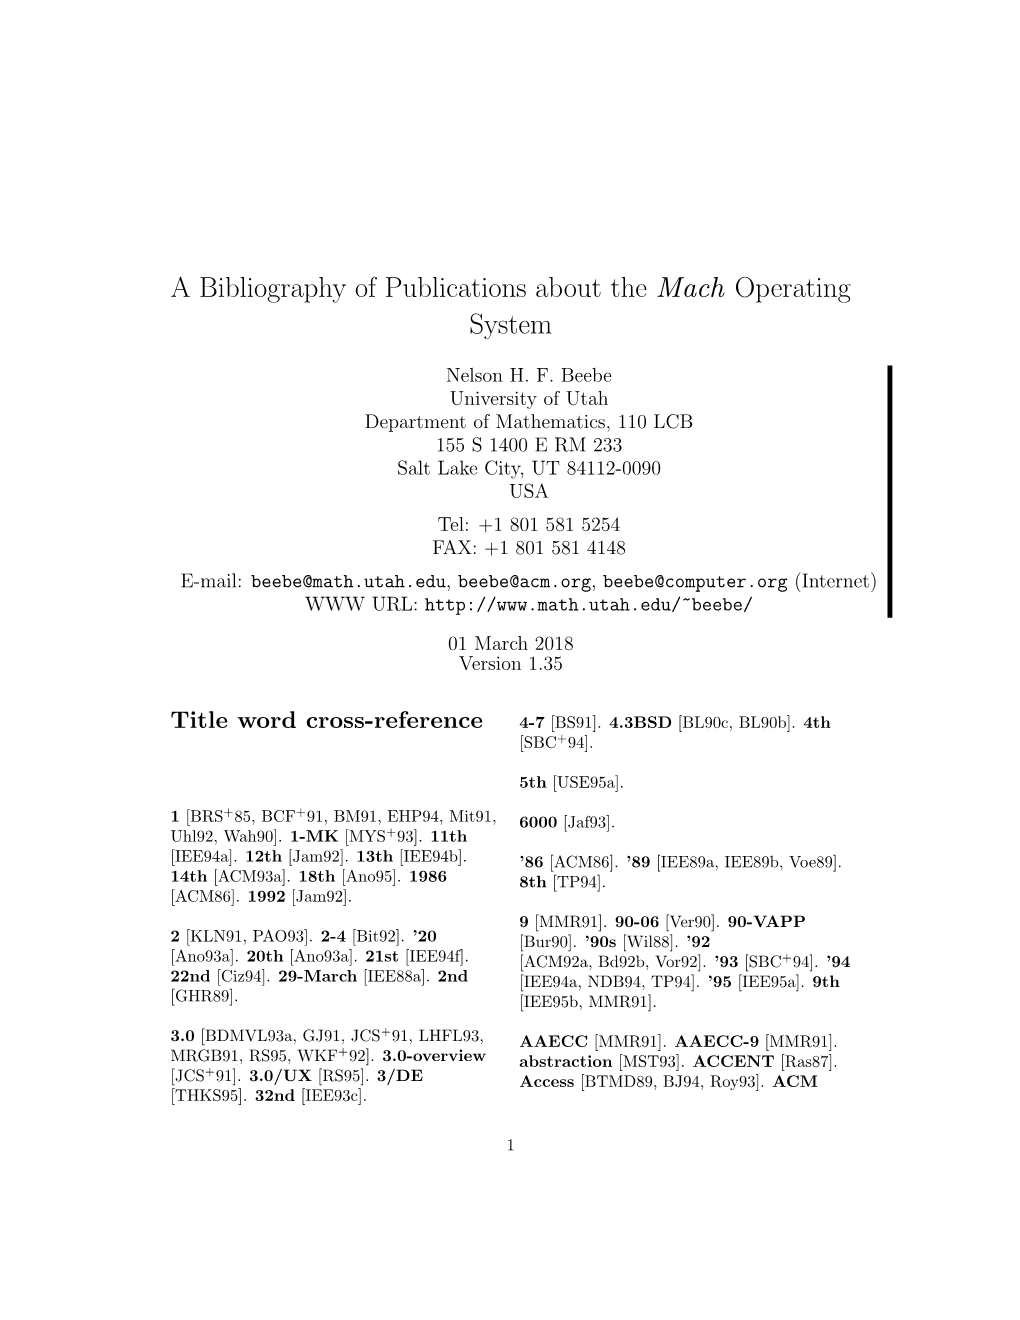 A Bibliography of Publications About the Mach Operating System